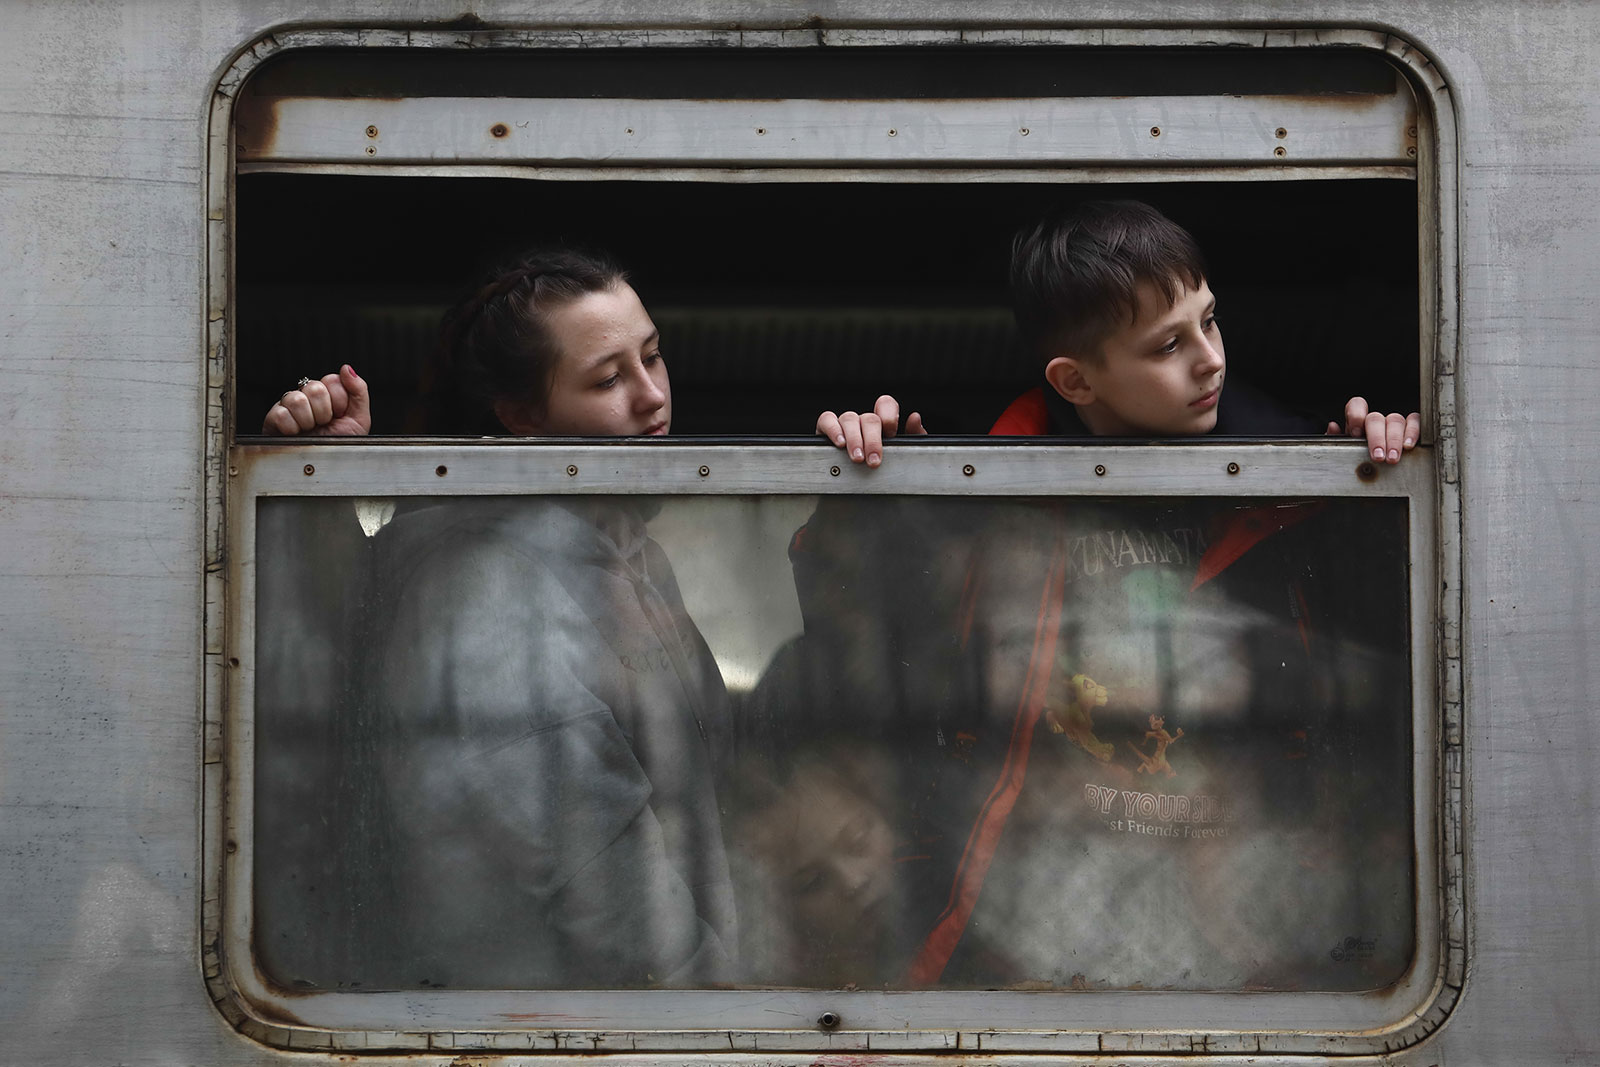 People fleeing from Ukraine arrive at the train station in Przemysl, Poland, on March 3.